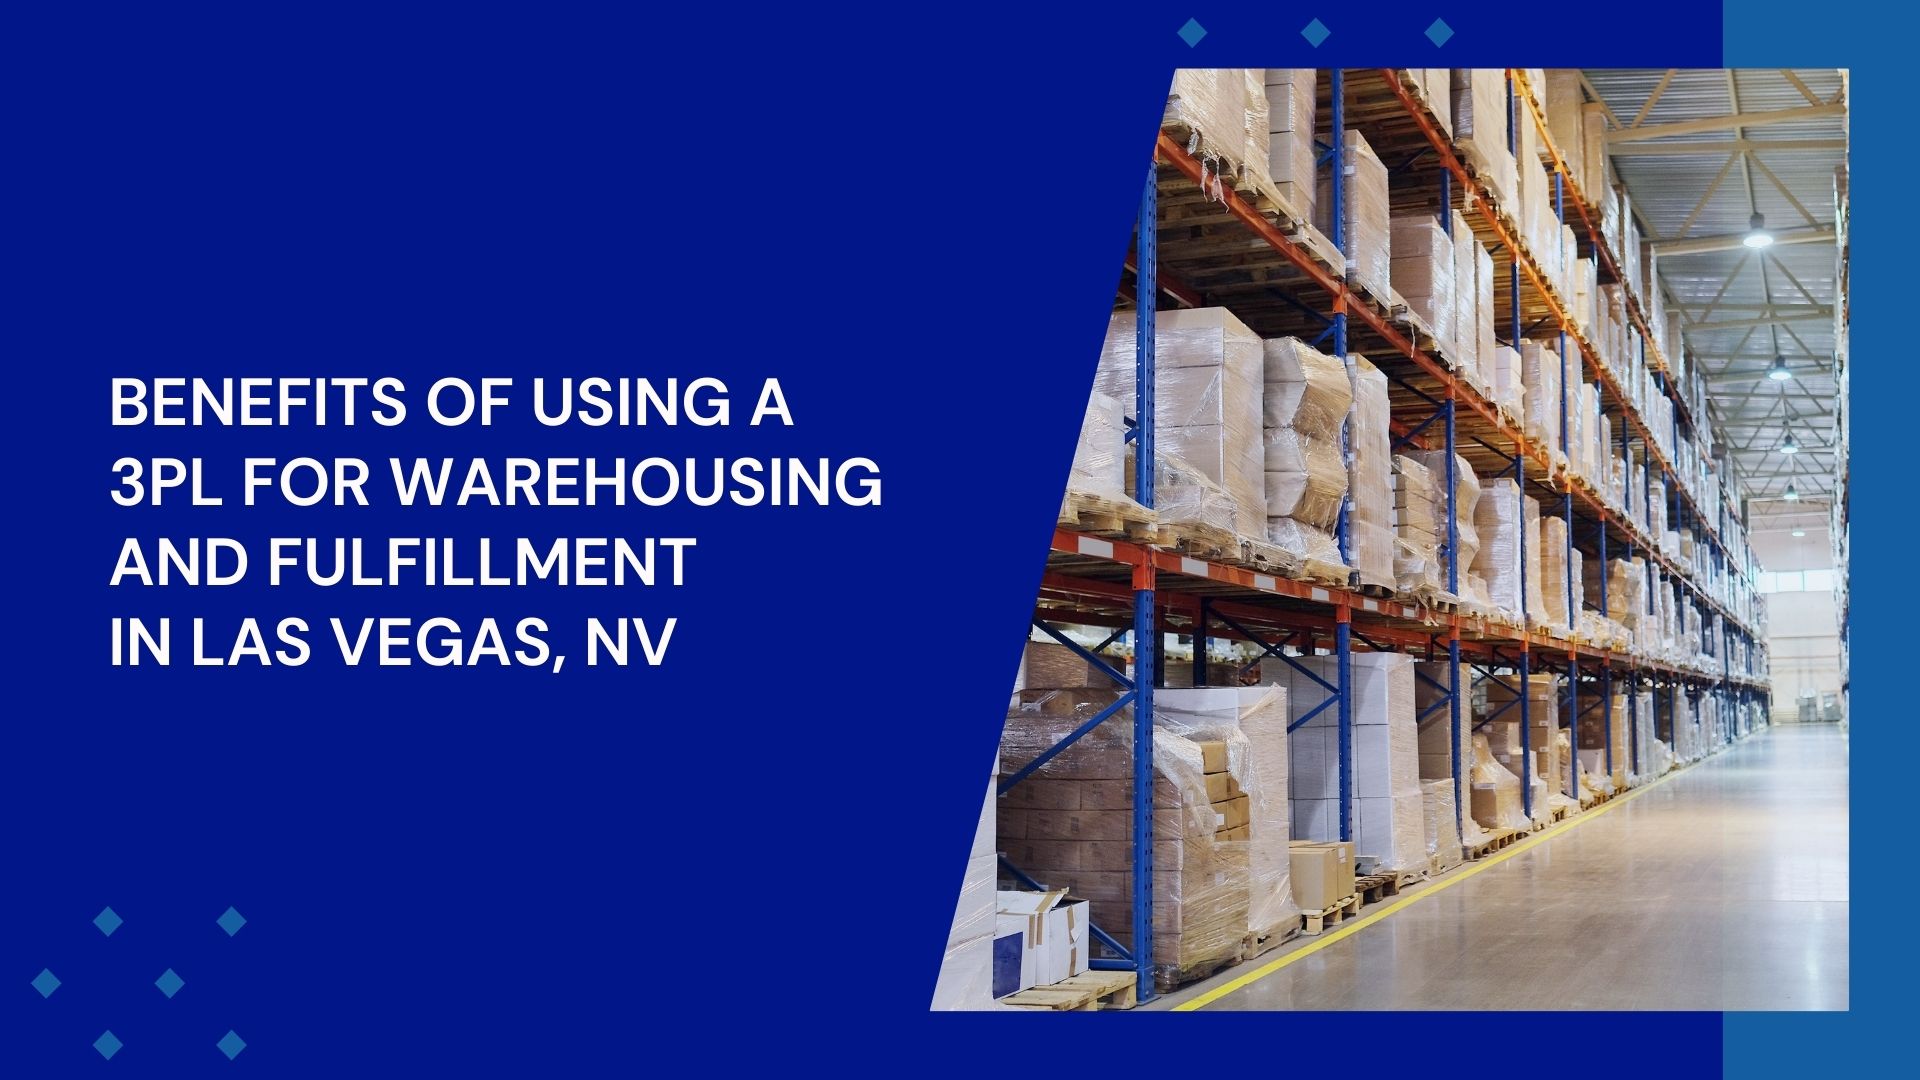 Whizolosophy | 11 Benefits of Using a 3PL for Warehousing and Fulfillment in Las Vegas